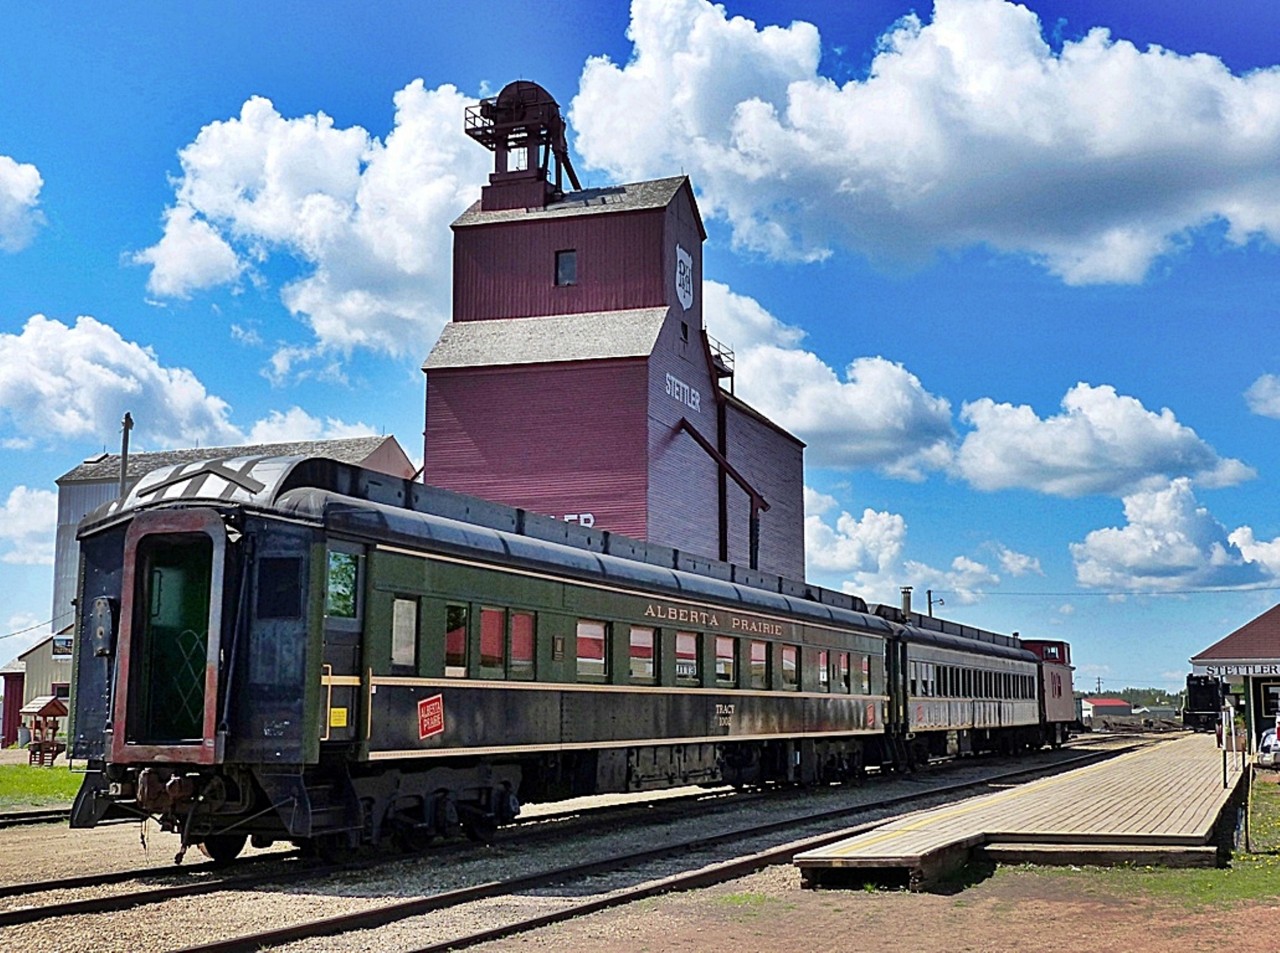 In the foreground is sleeper "Tracy" currently in use by Alberta Prairie Railway Excursions. This sleeper was built in 1931 by Canadian Car & Foundry and CPR as sleeper "Solsgirth", then renamed CPR sleeper "Tracy" in 1946. Sold to Alberta Prairie Railway Excursions in 1994.